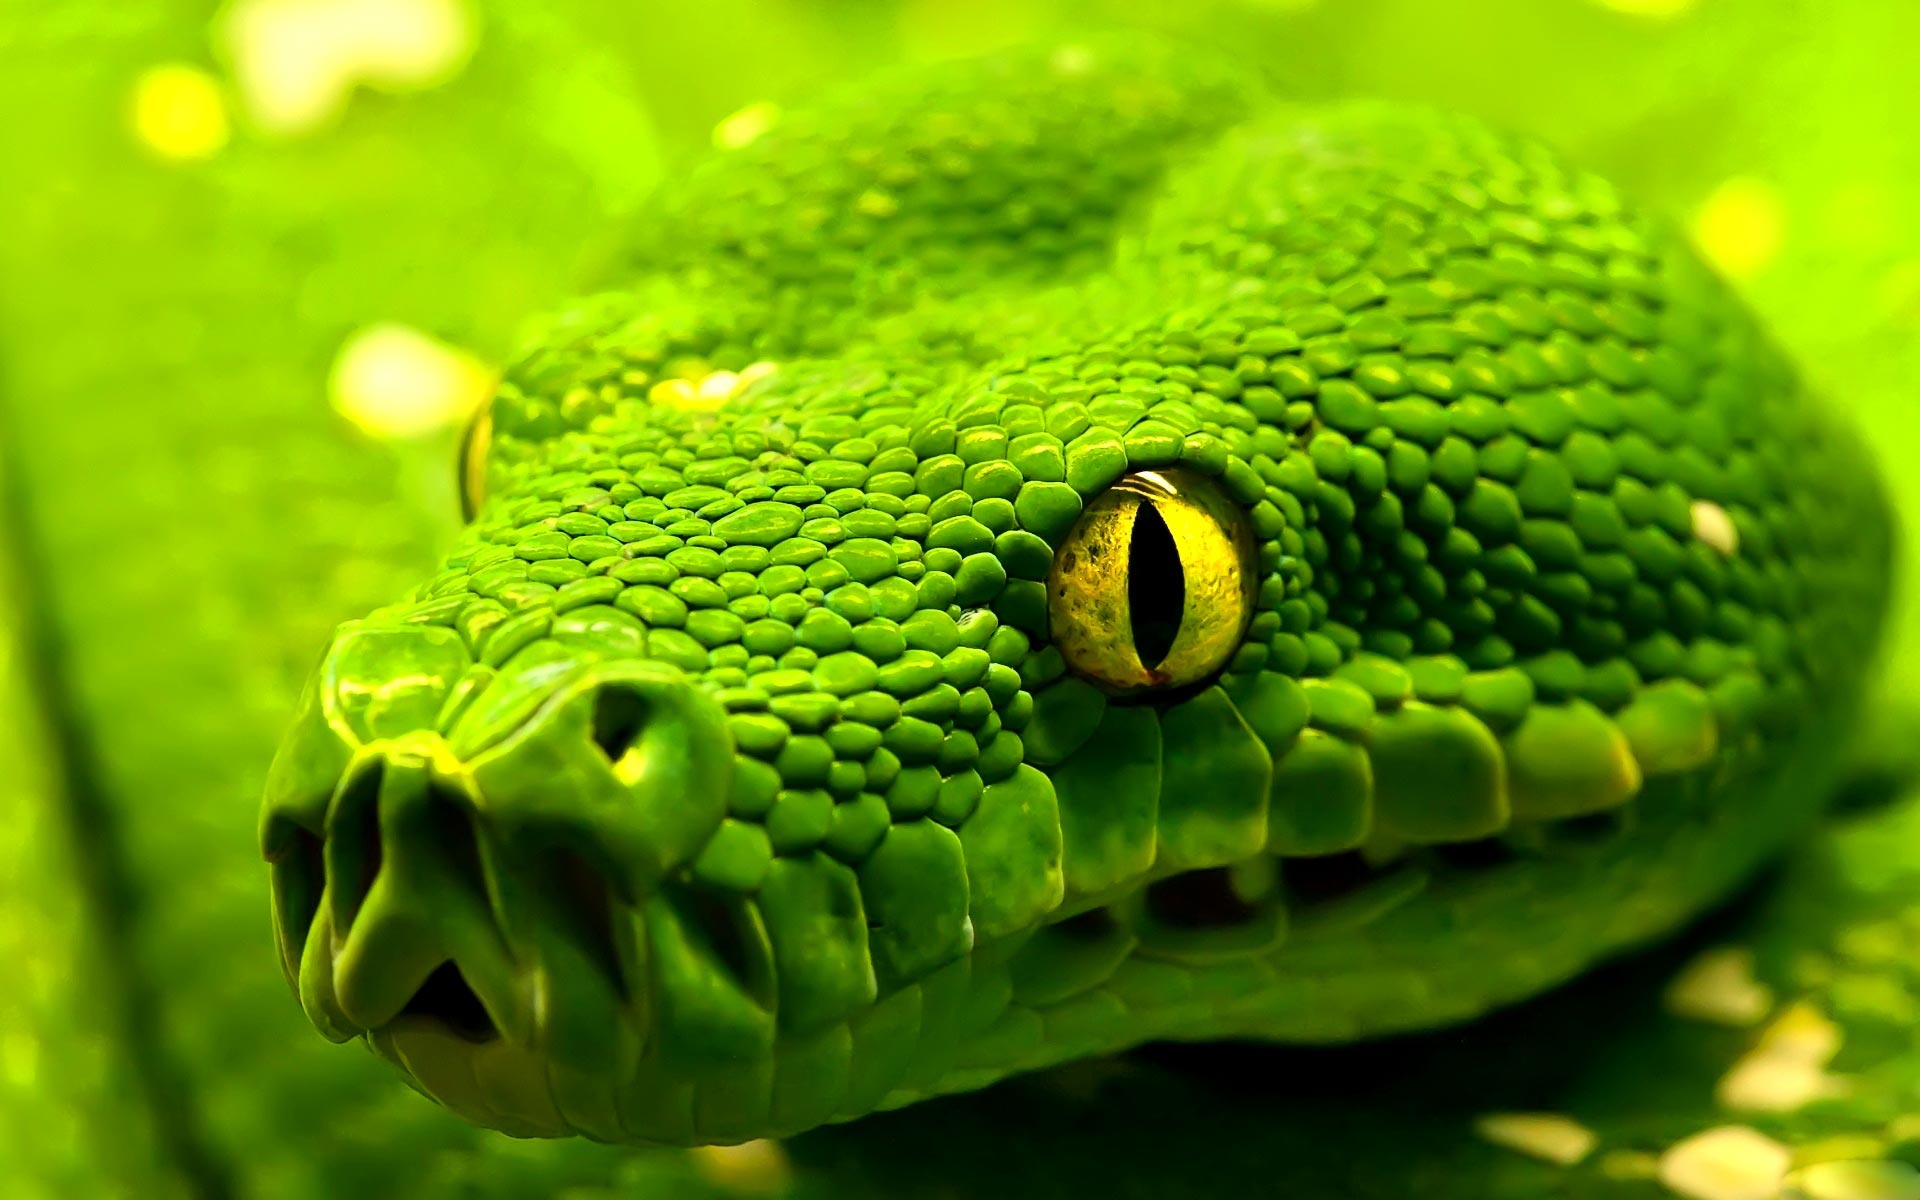 beautiful green snake hd wallpapers cool desktop background images